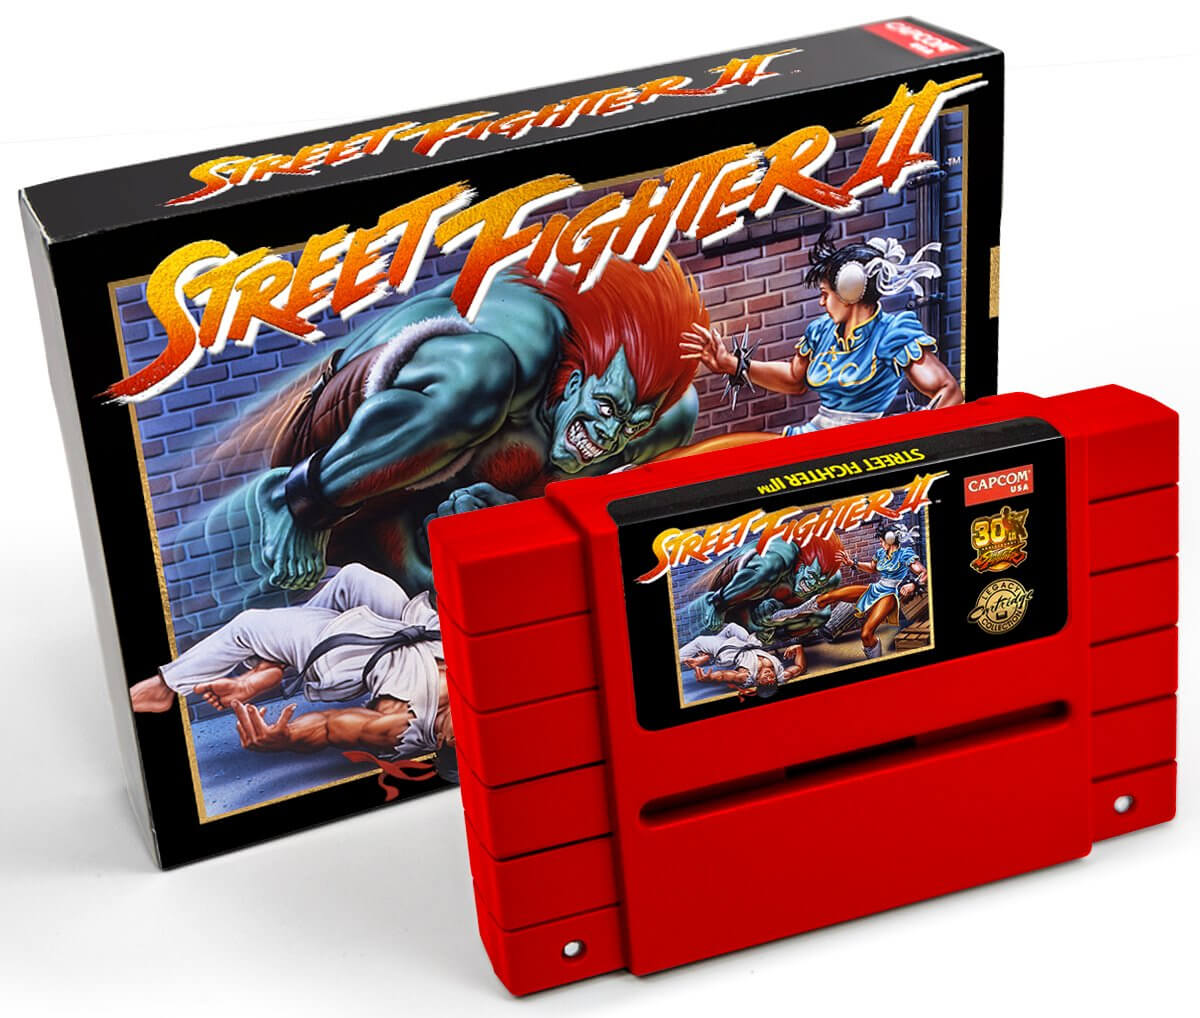 Capcom issues new Street Fighter 2 cartridge, but warns using it may cause your SNES to catch fire